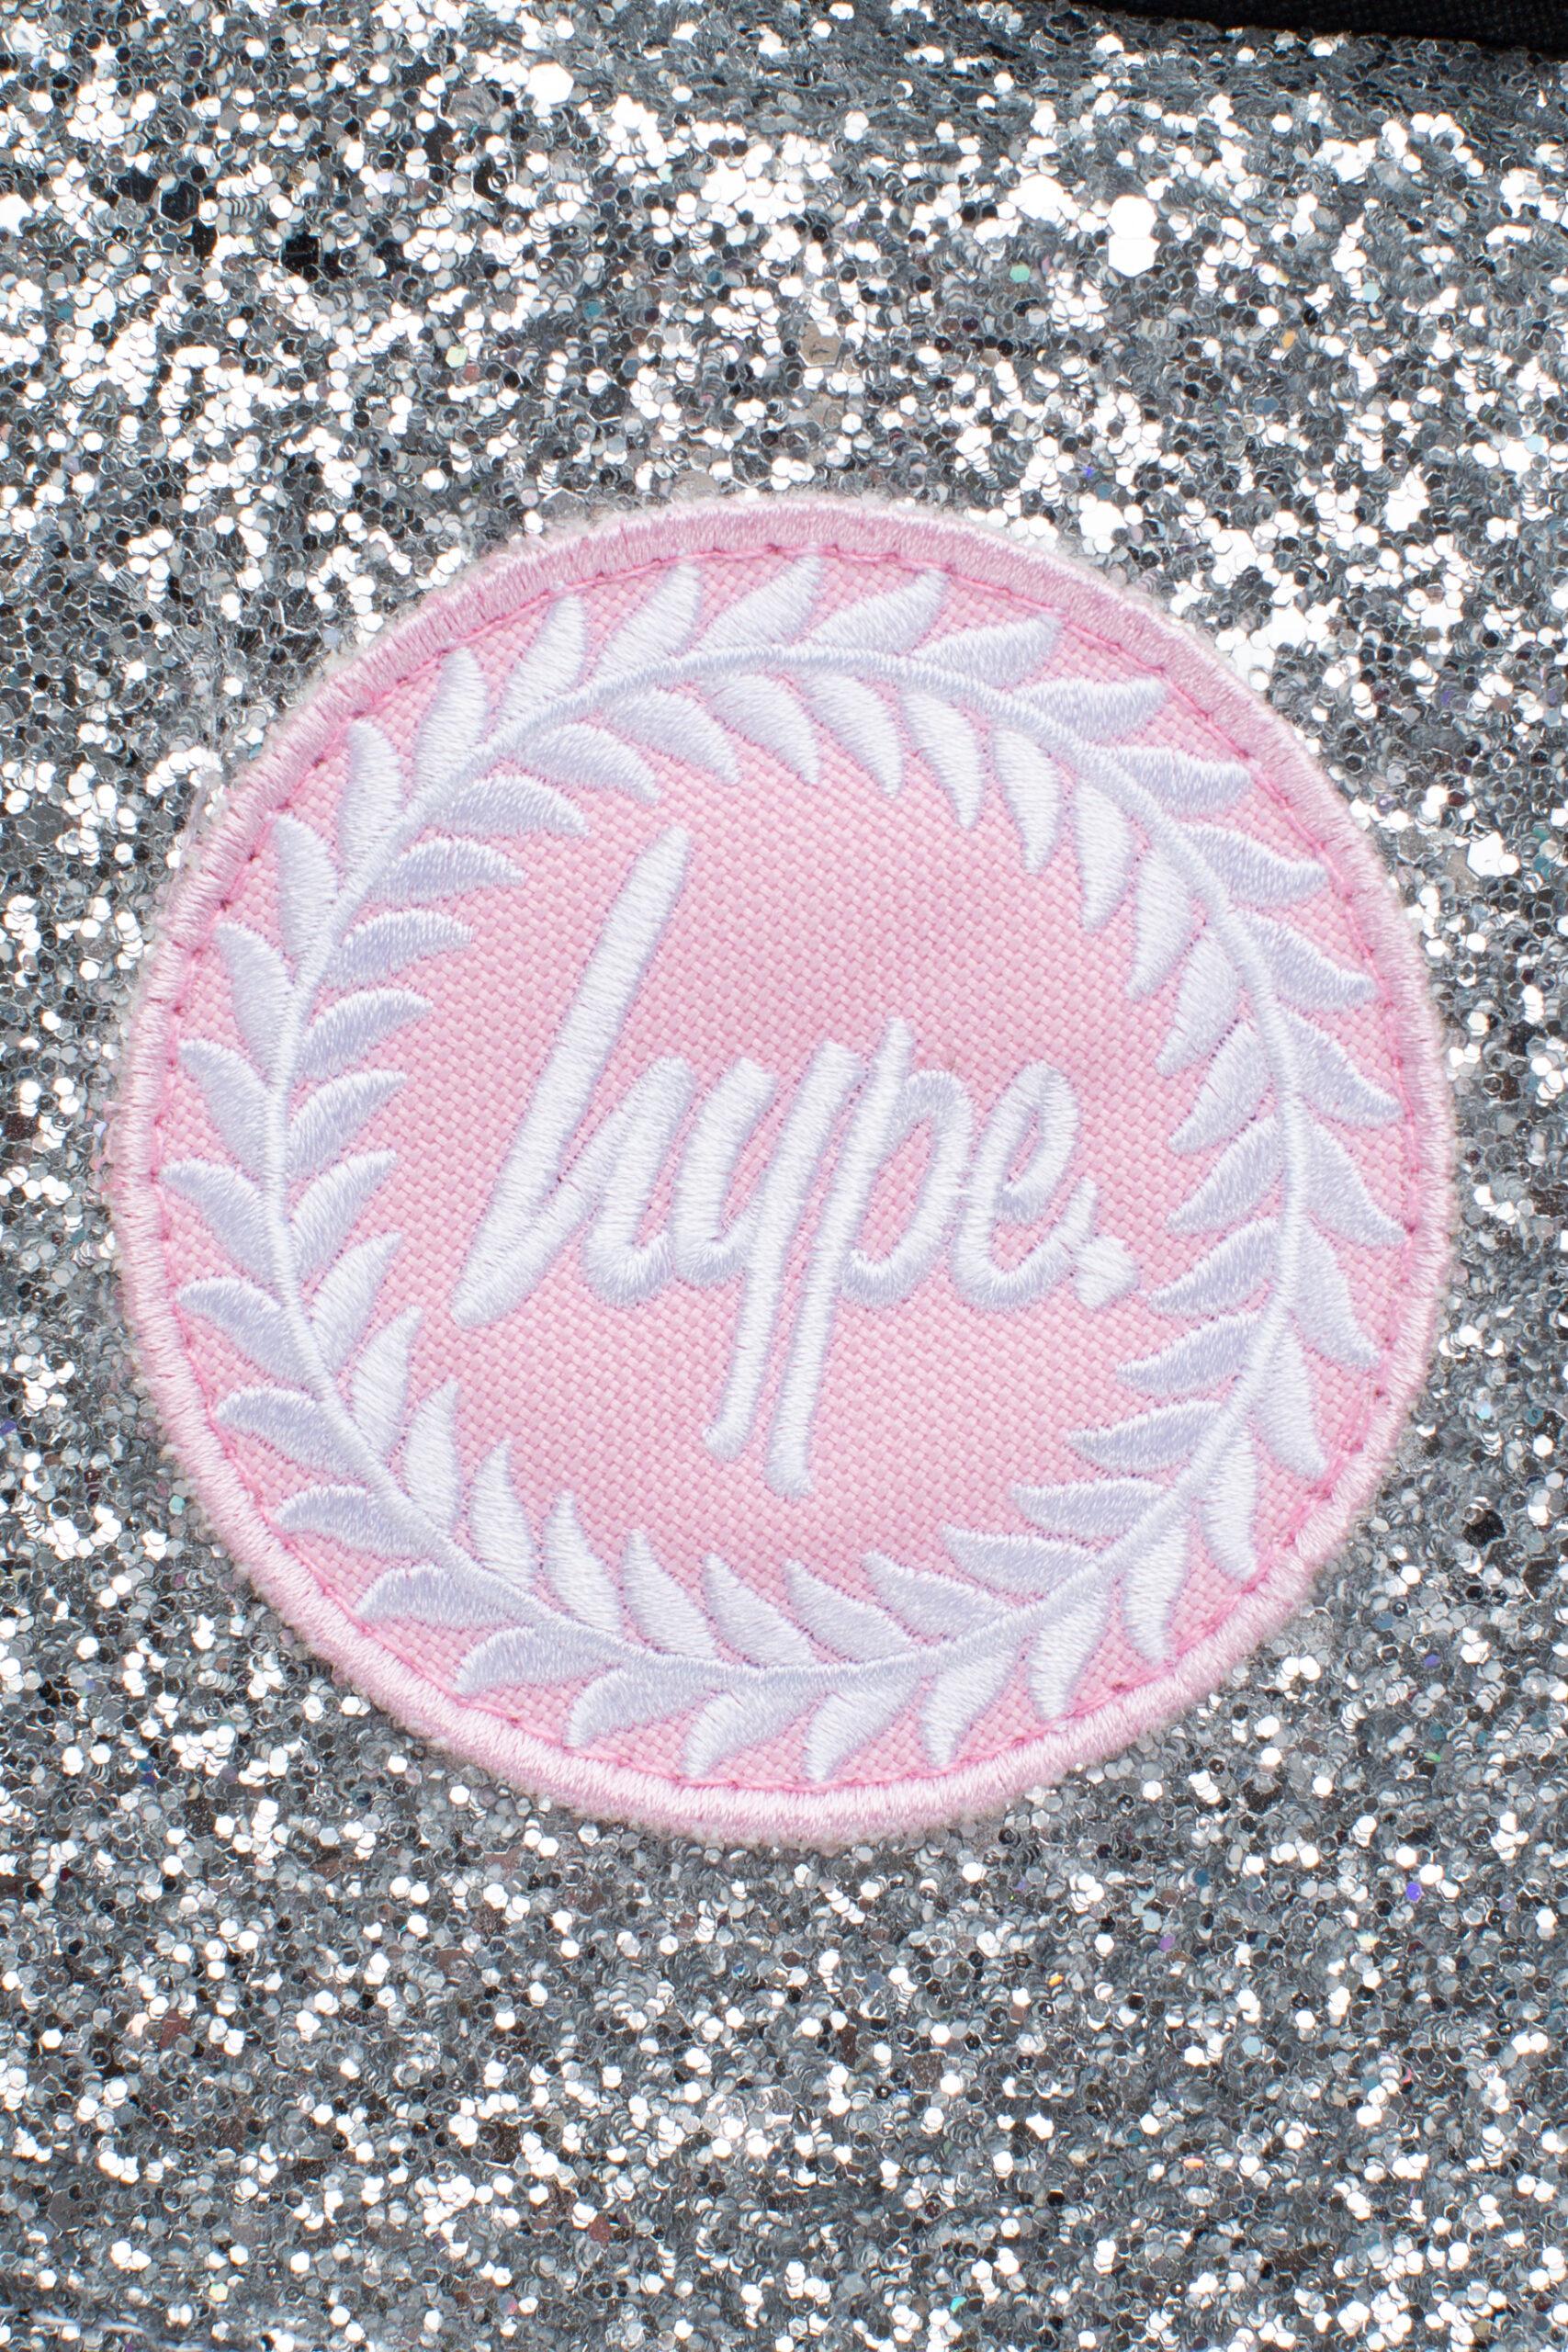 hype silver glitter backpack close up